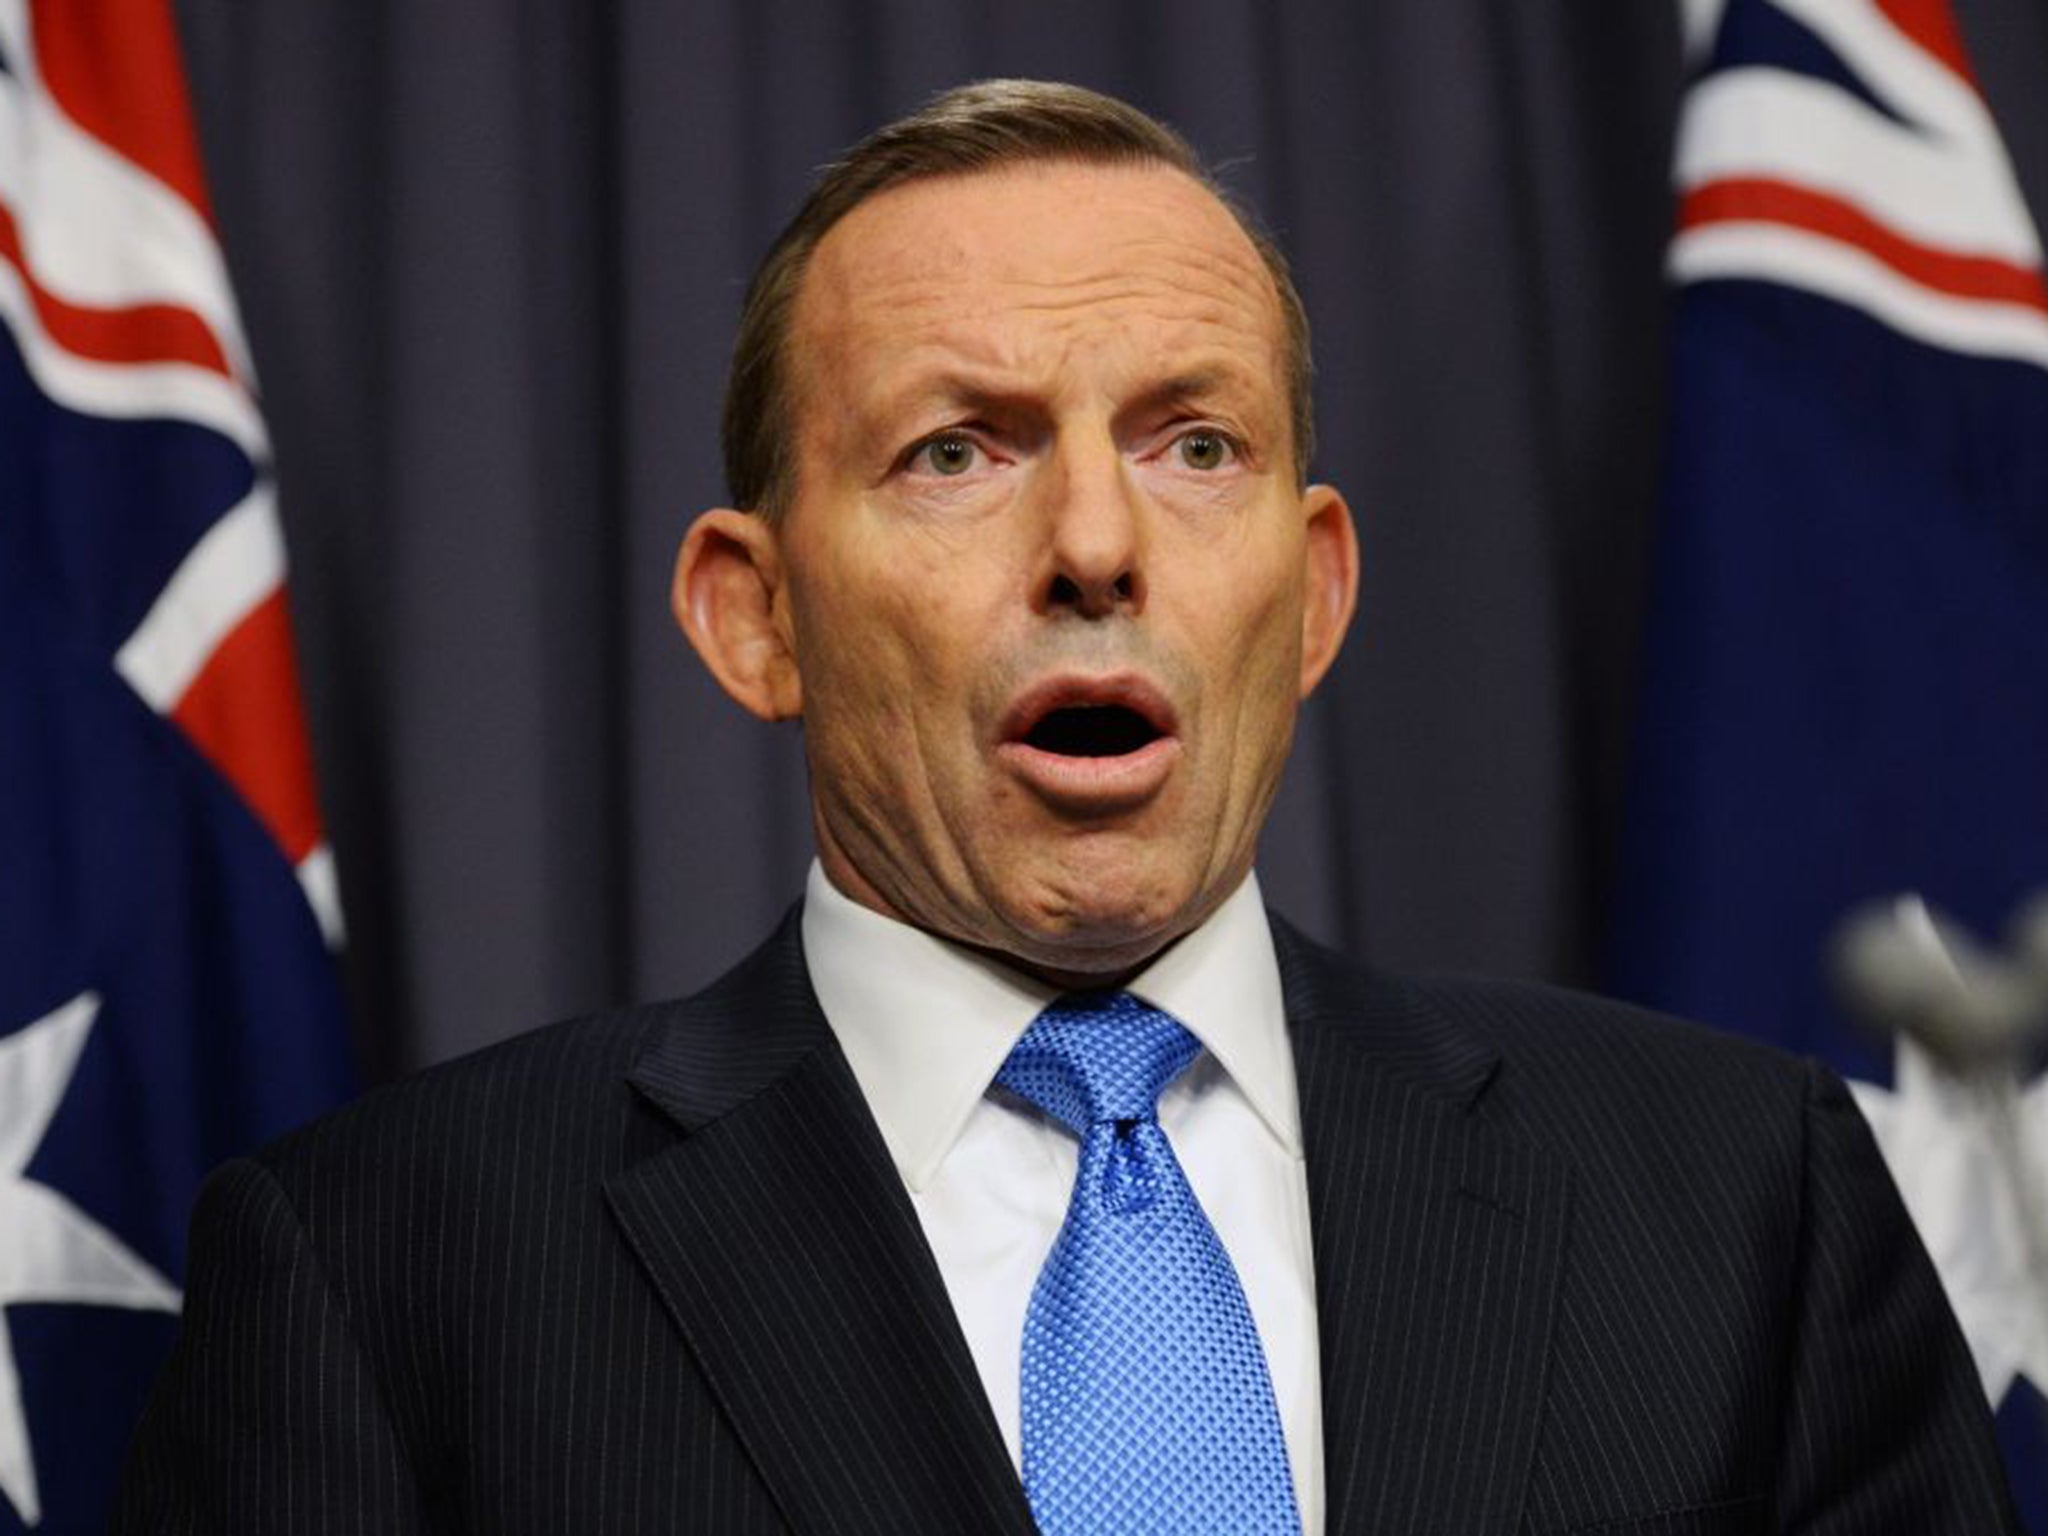 Tony Abbott discussing his departure at a press conference at Parliament House in Canberra, Australia. His two years as Prime Minister were beset by controversy